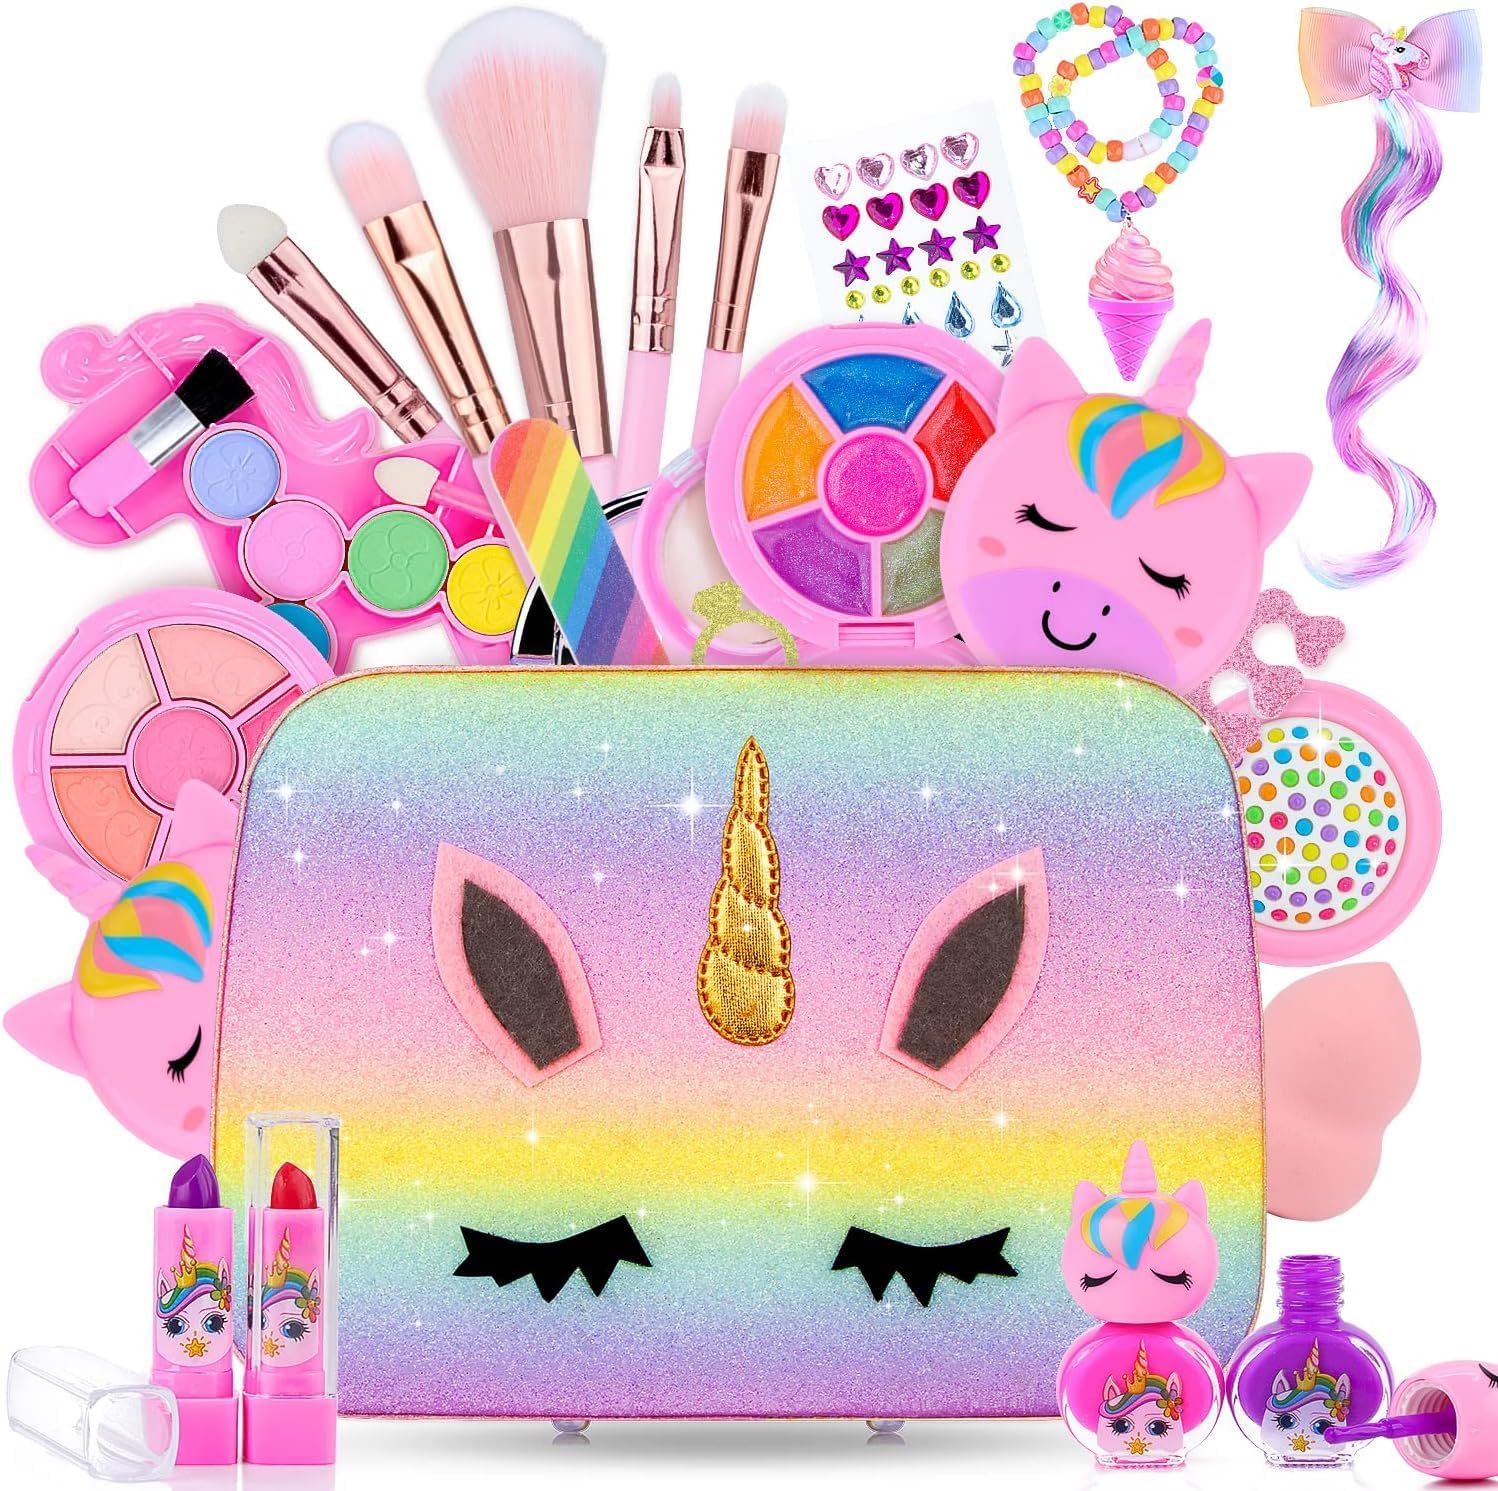 Christmas Birthday Gifts Makeup Kit for Kids, Washable Cosmetic Set as Princess Birthday Gift Toy with Bag, Children Cosmetic Beauty Set for Girls Age 4 5 6 7 8 9 10 Year Old